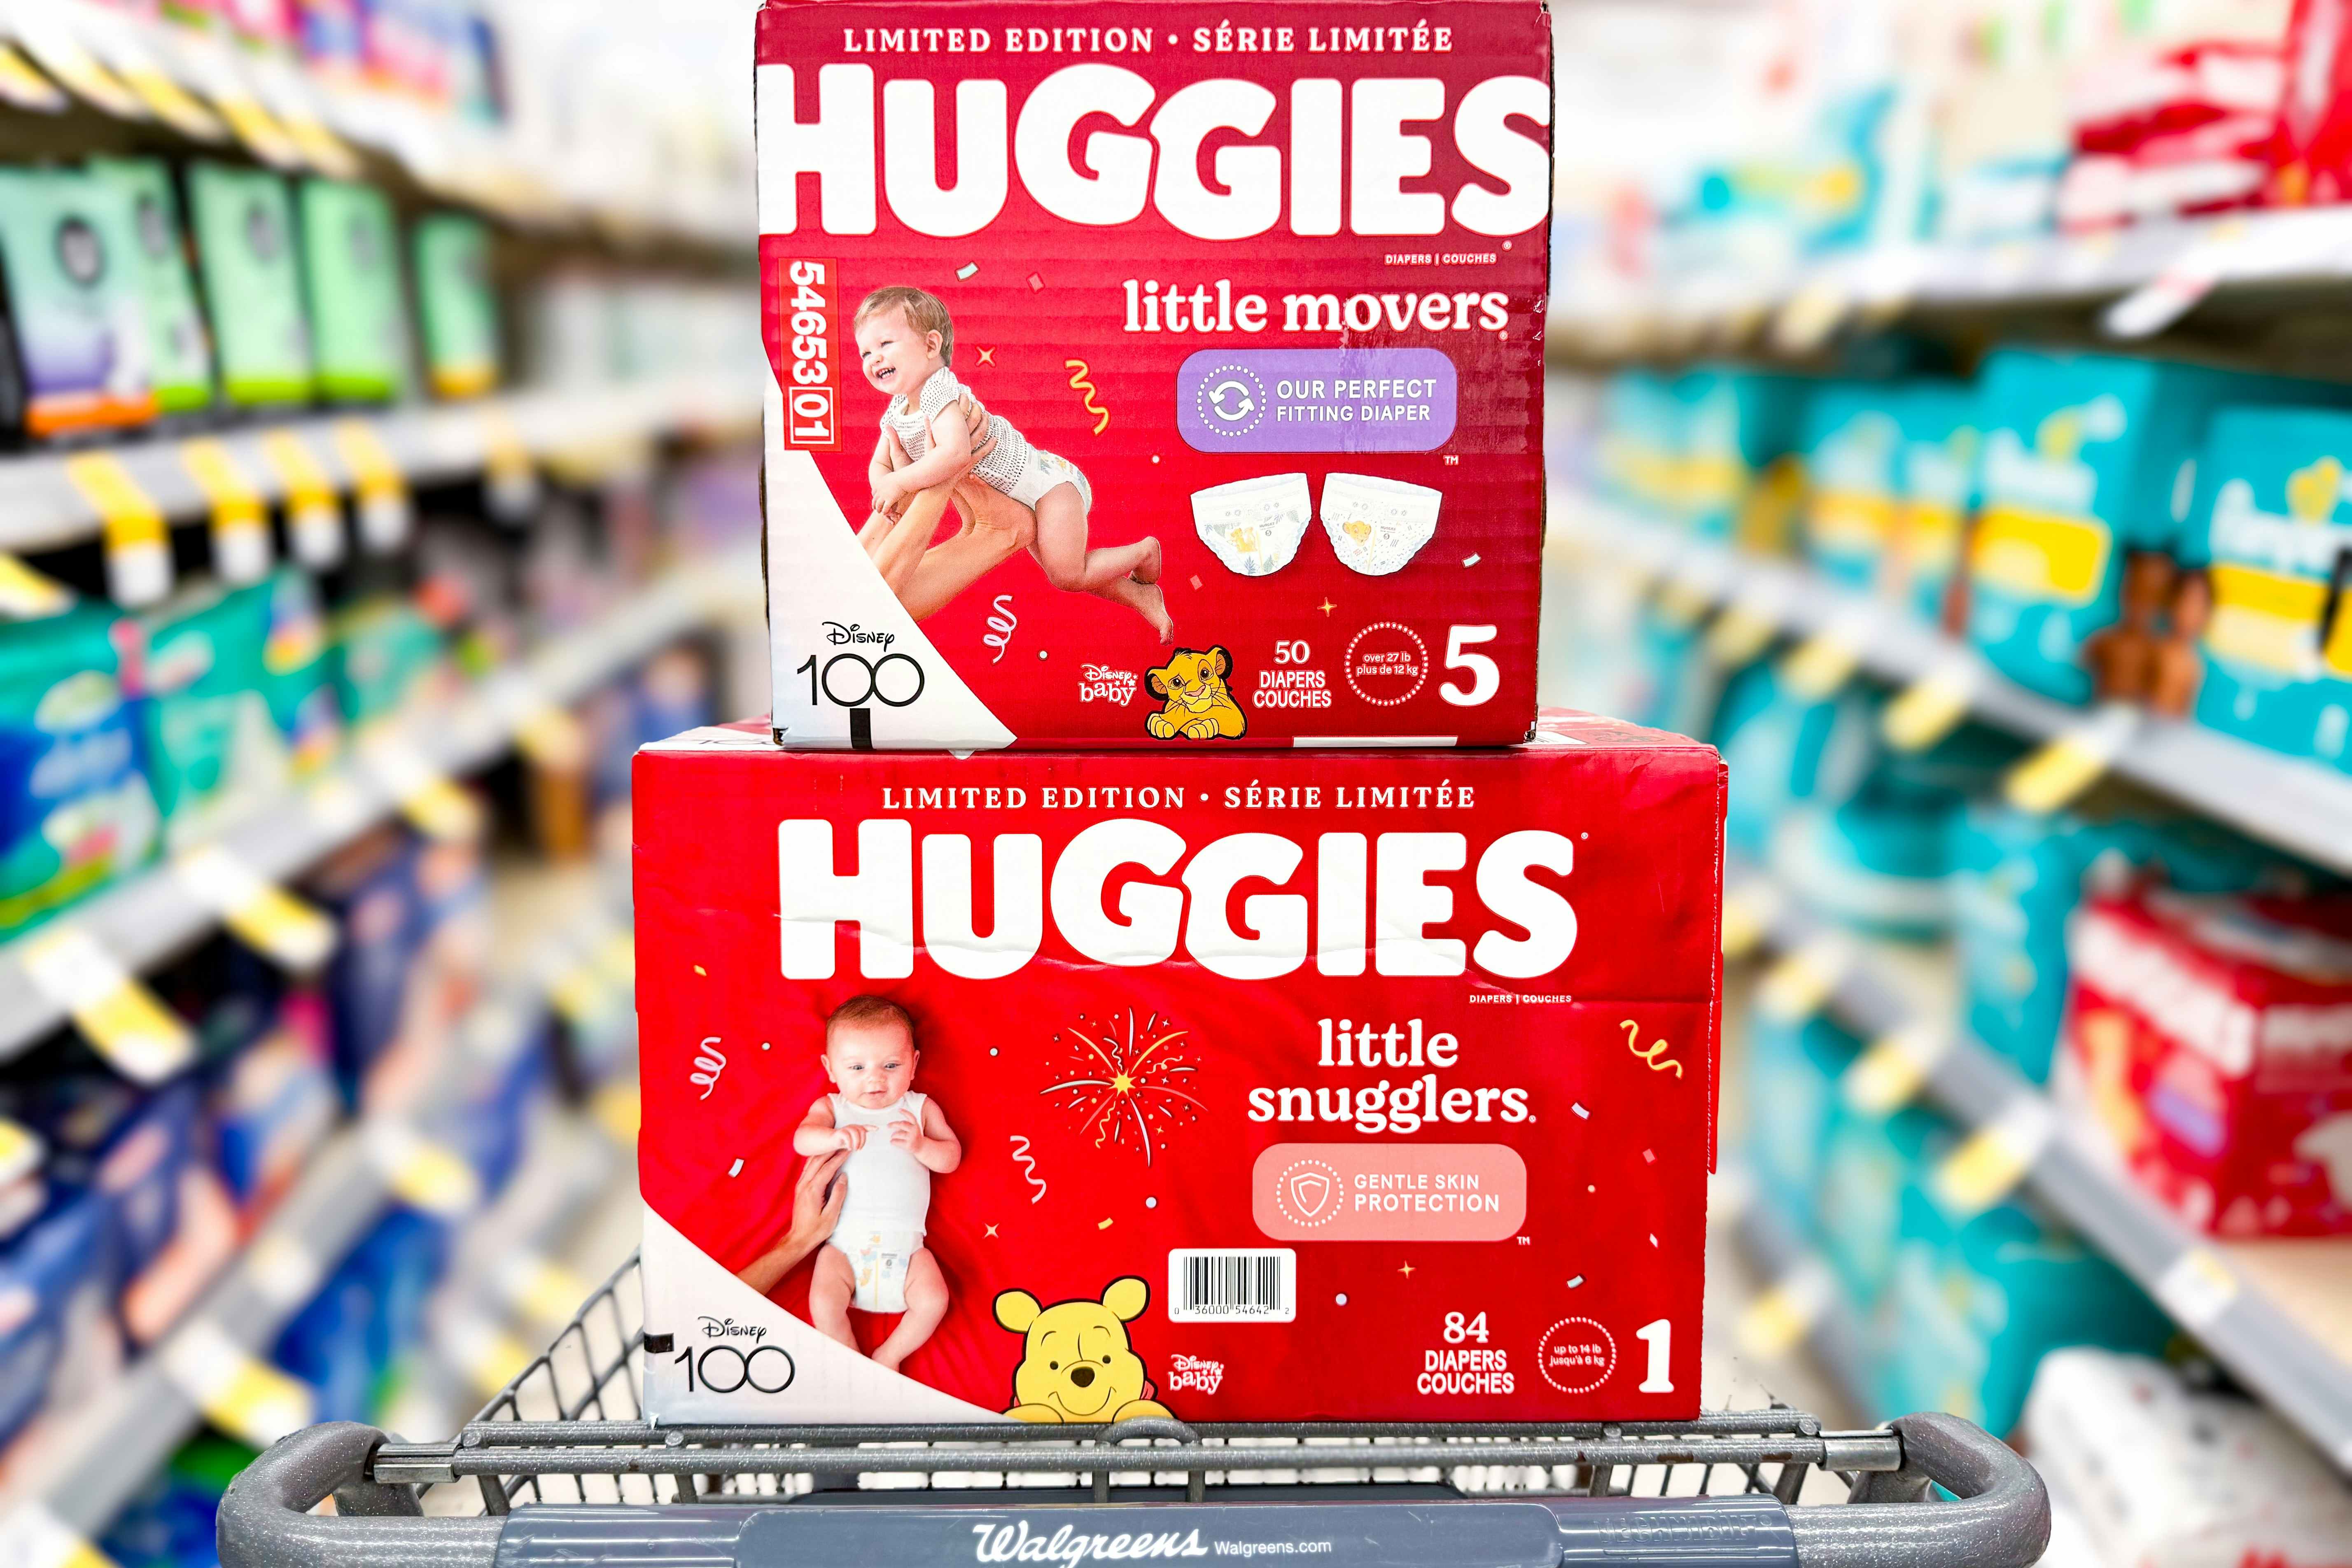 Get $7 Off Huggies Diapers 44-Count or Larger at Walgreens